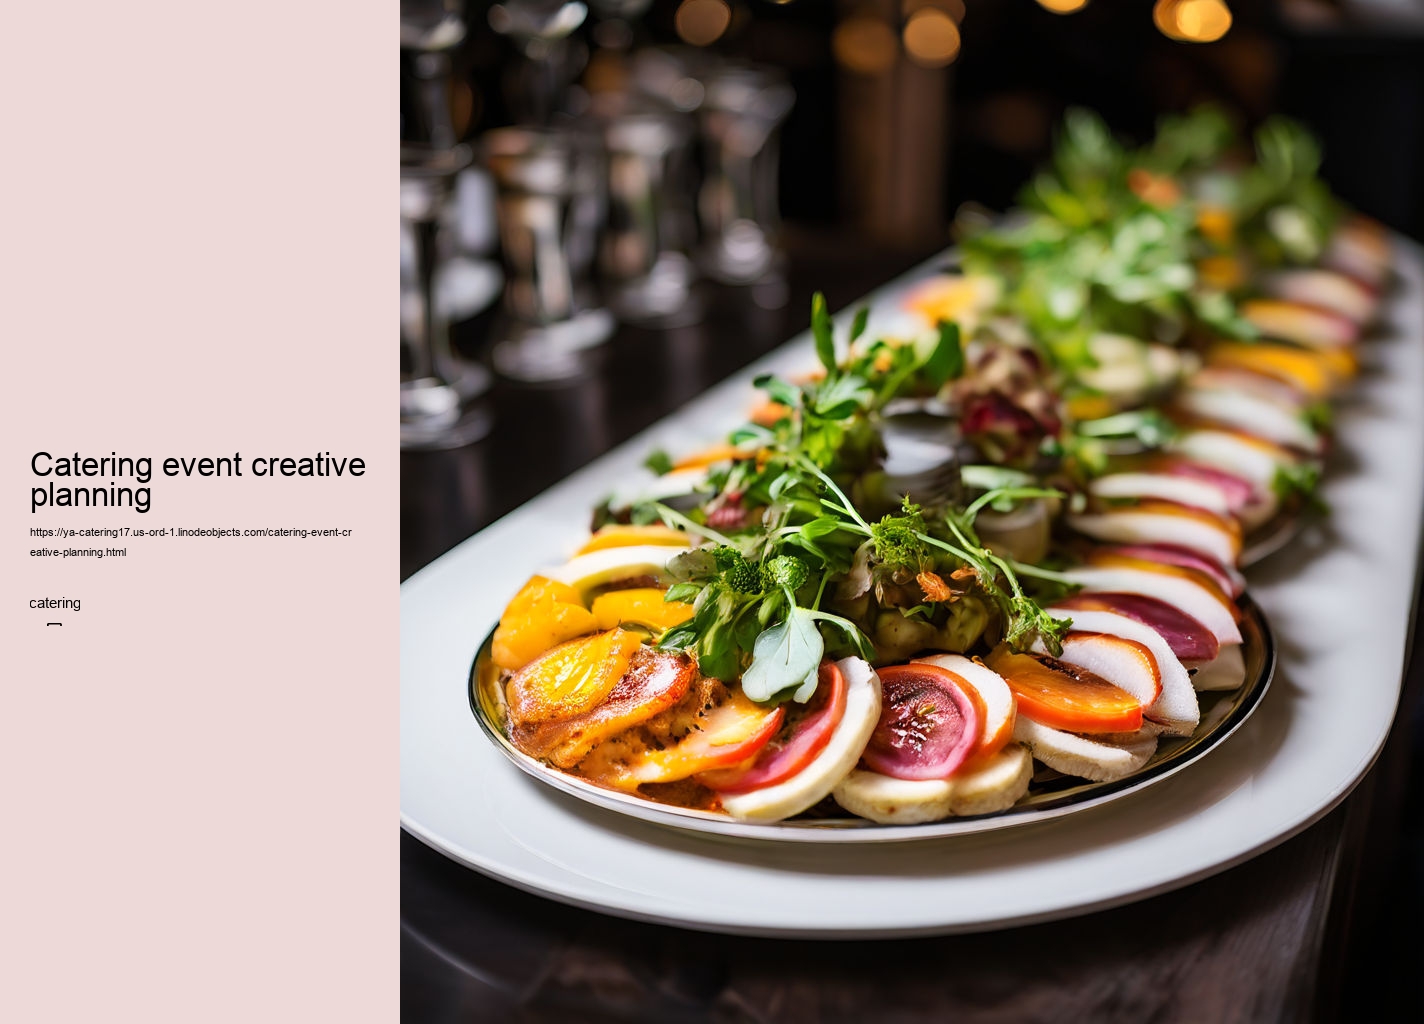 Catering event creative planning